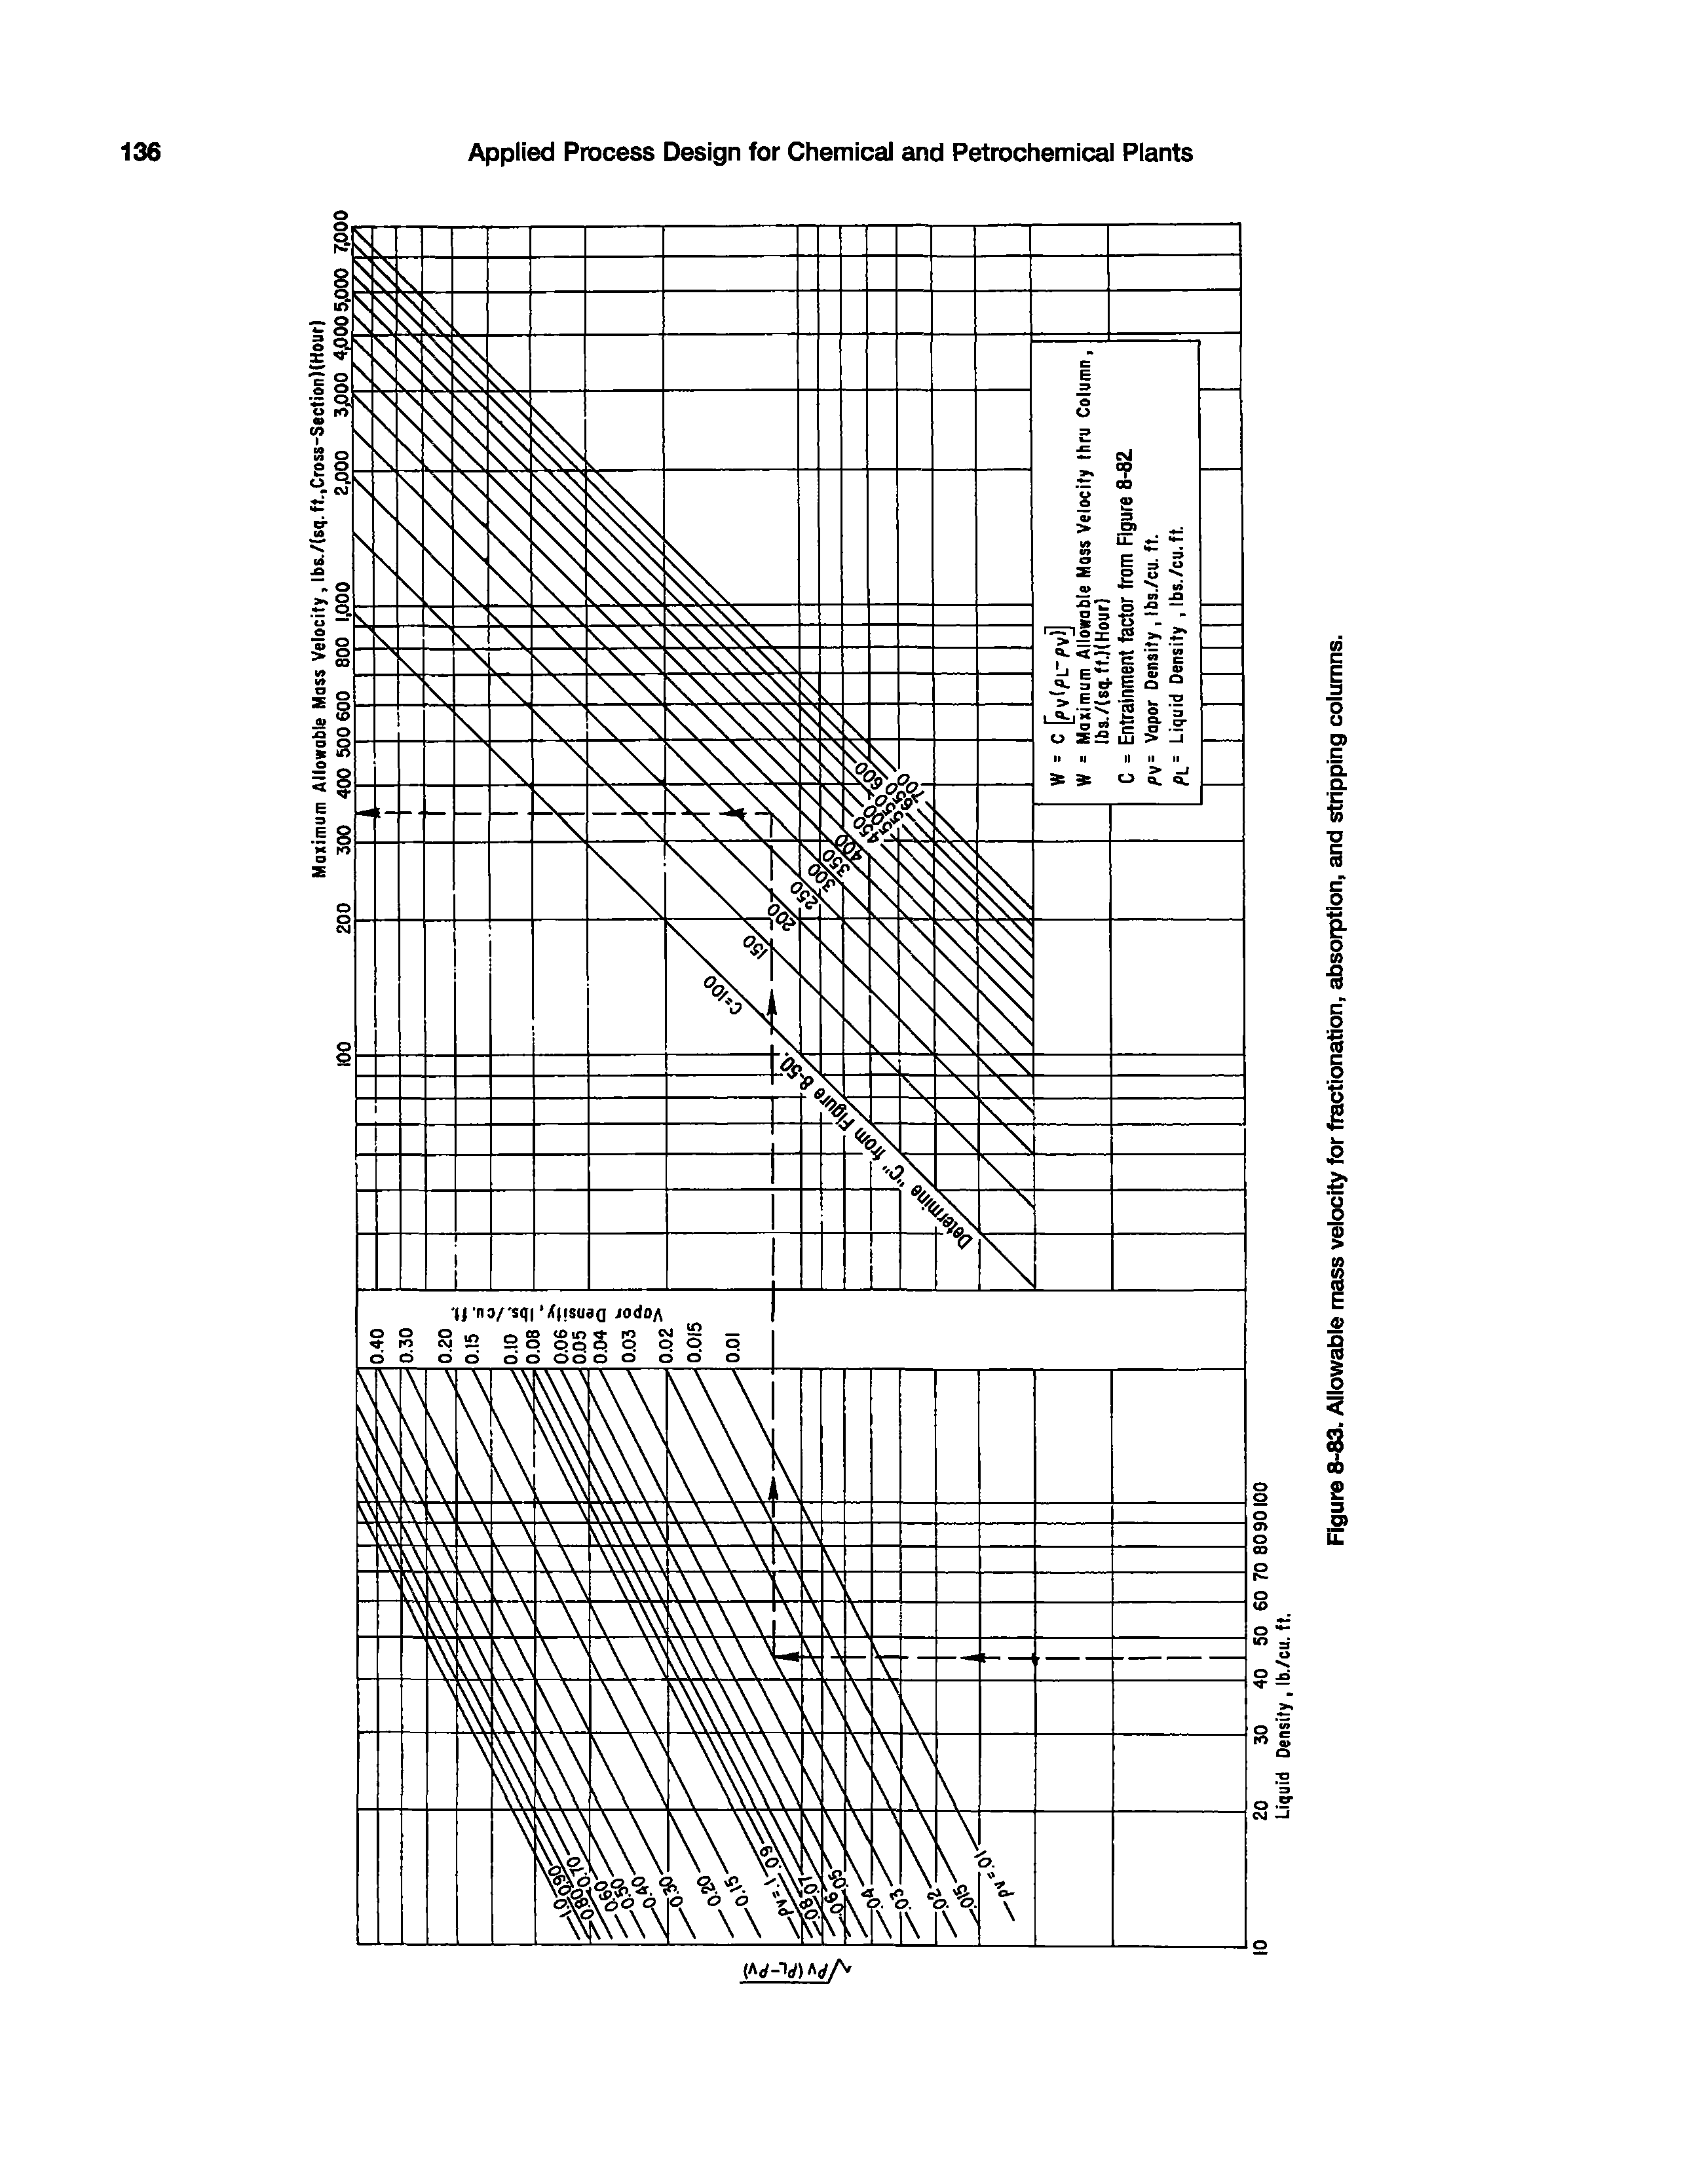 Figure 8-83. Allowable mass velocity for fractionation, absorption, and stripping columns.